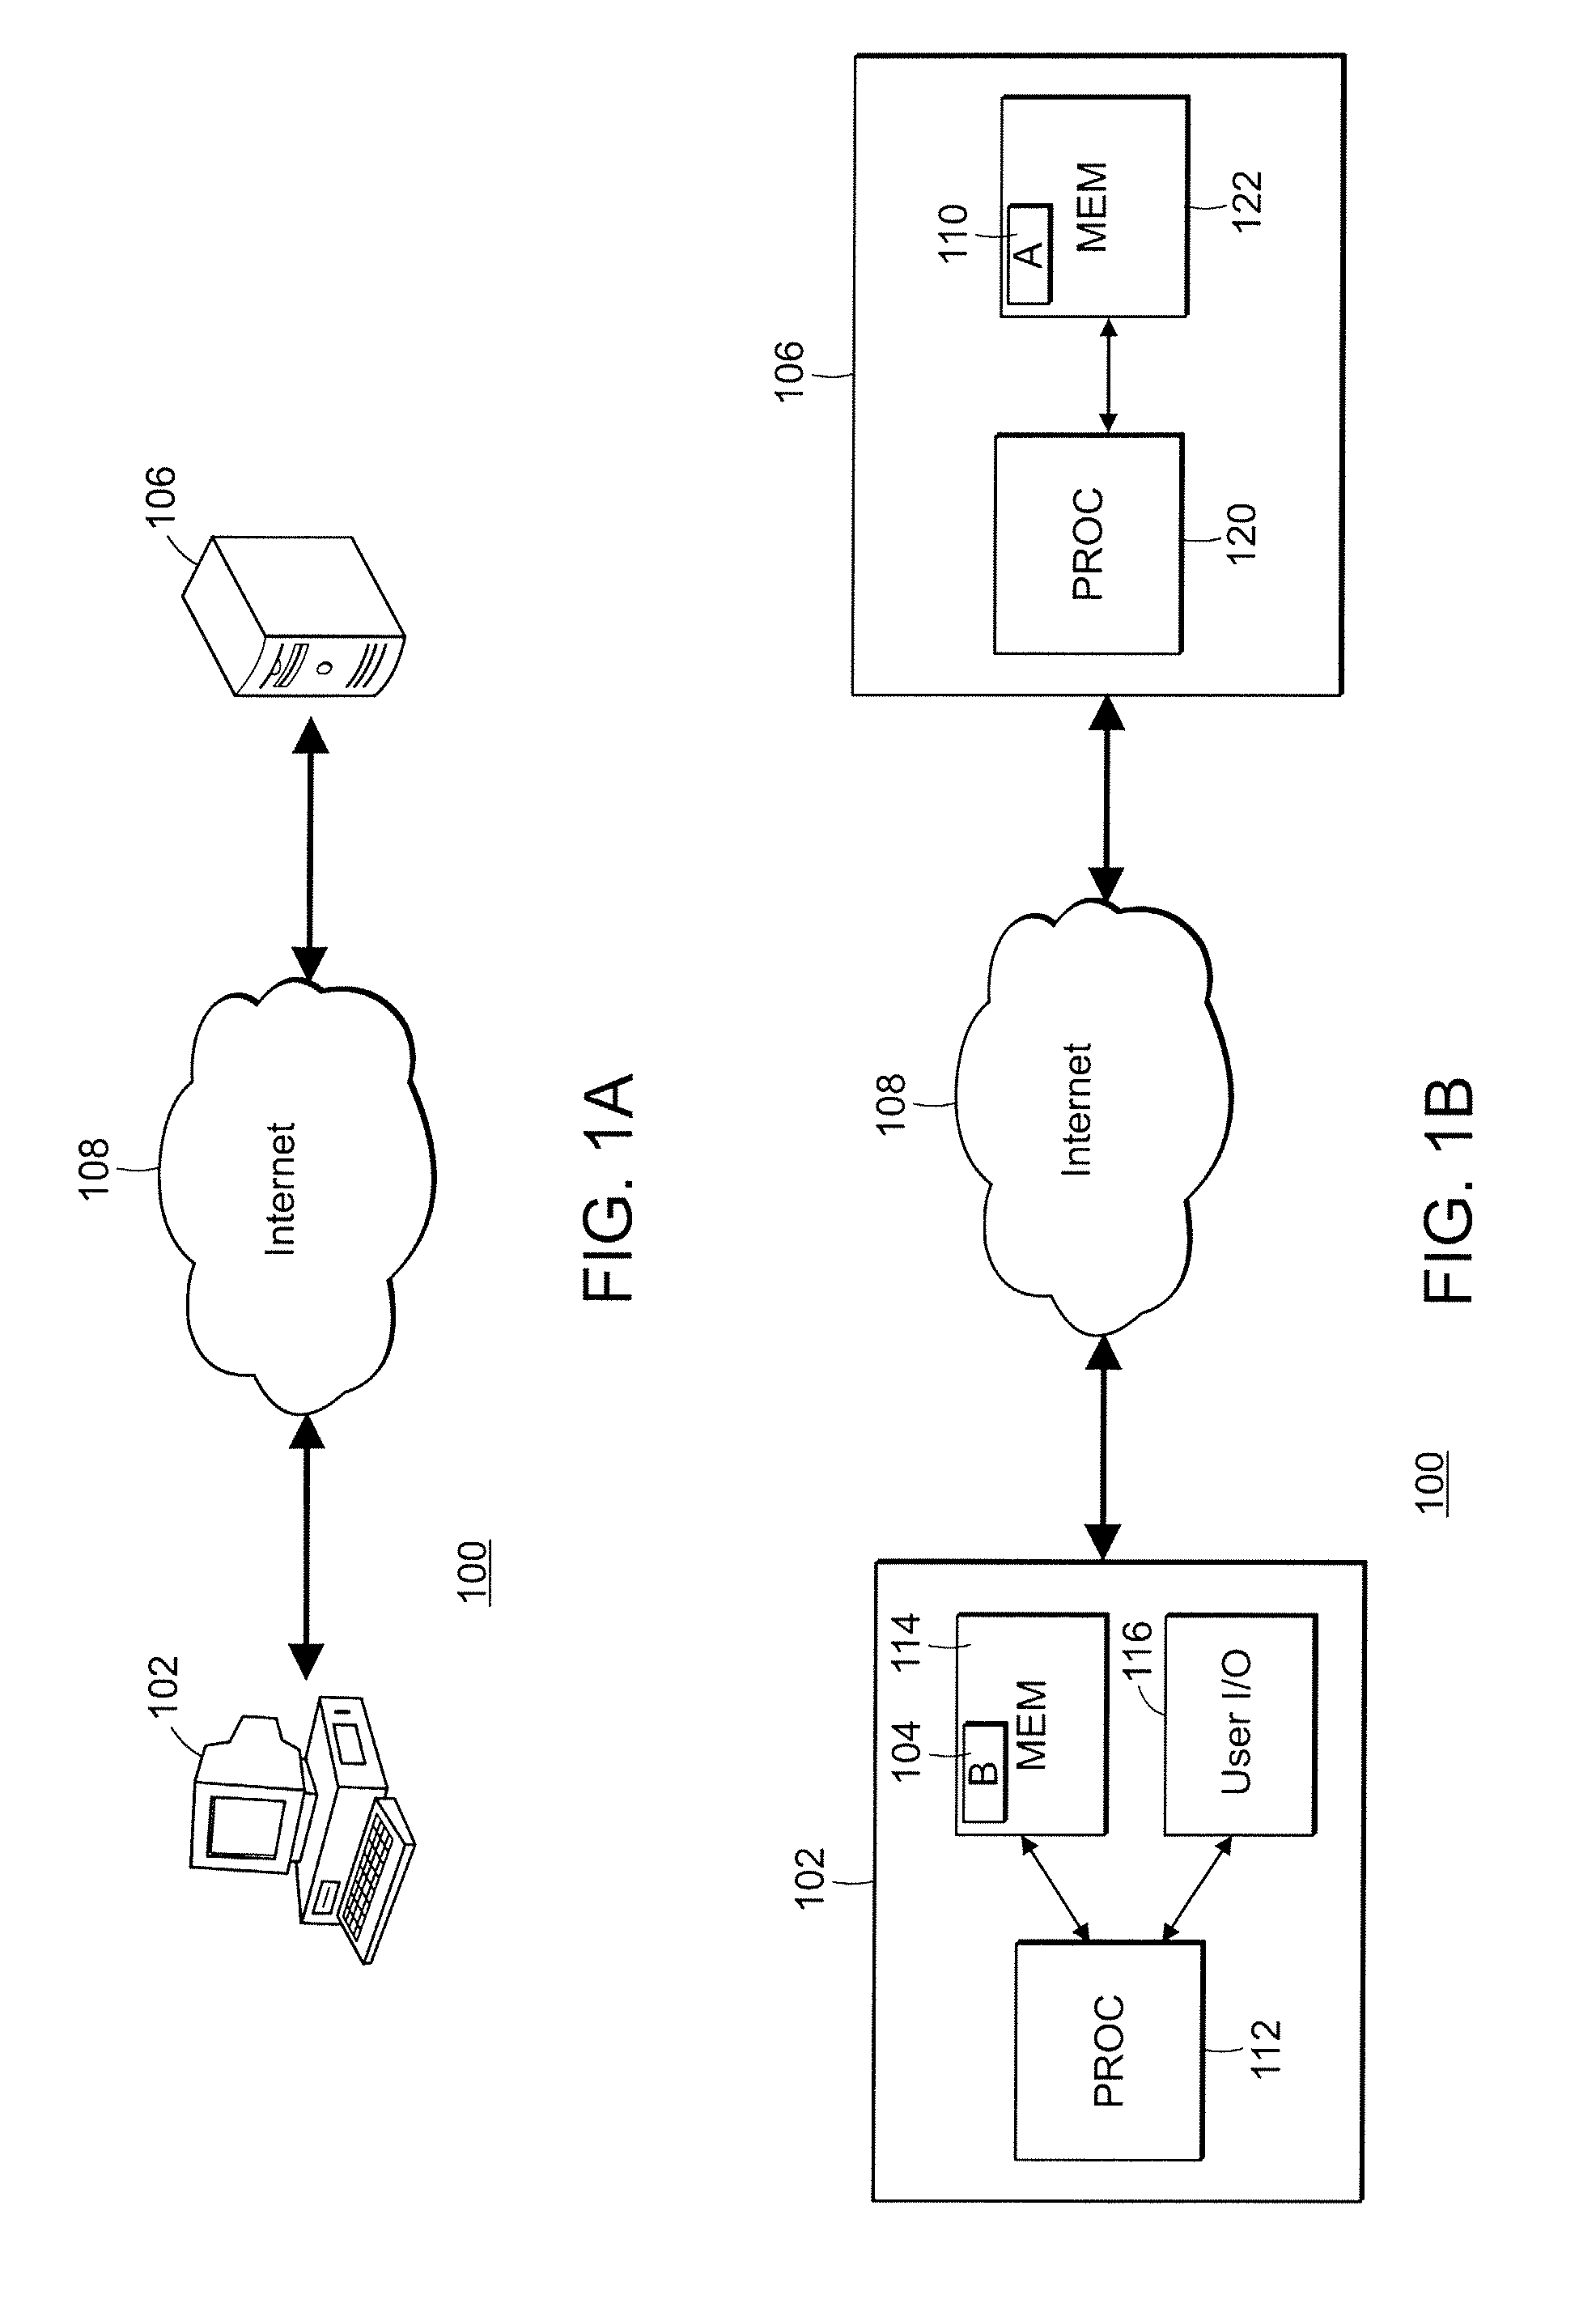 System for and method of providing a user interface for a computer-based software application